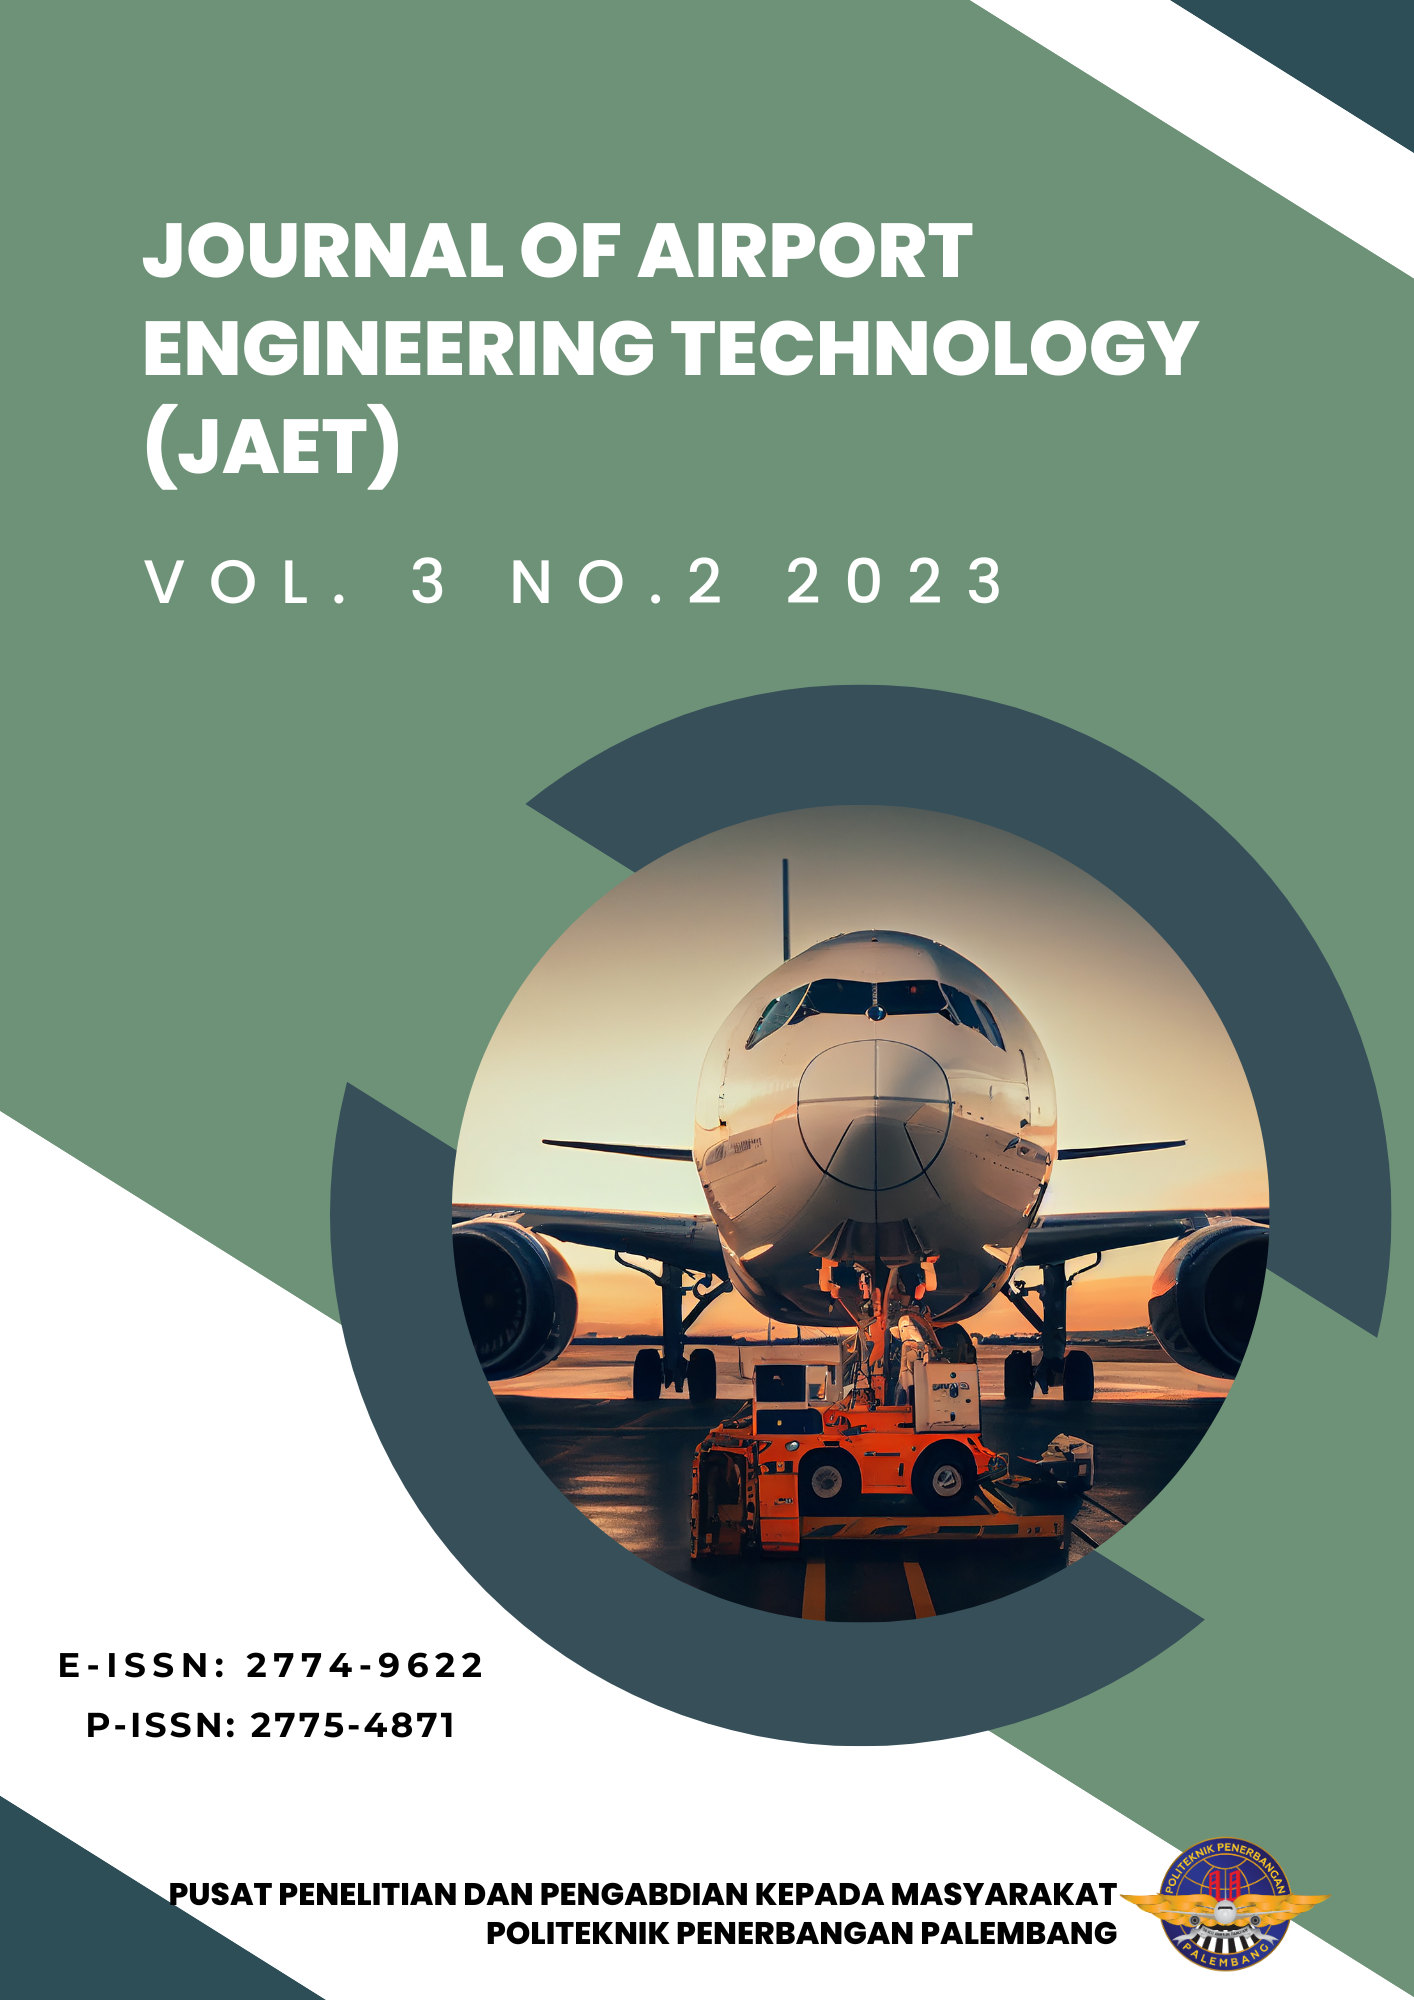 					View Vol. 3 No. 2 (2023): Journal of Airport Engineering Technology (JAET)
				